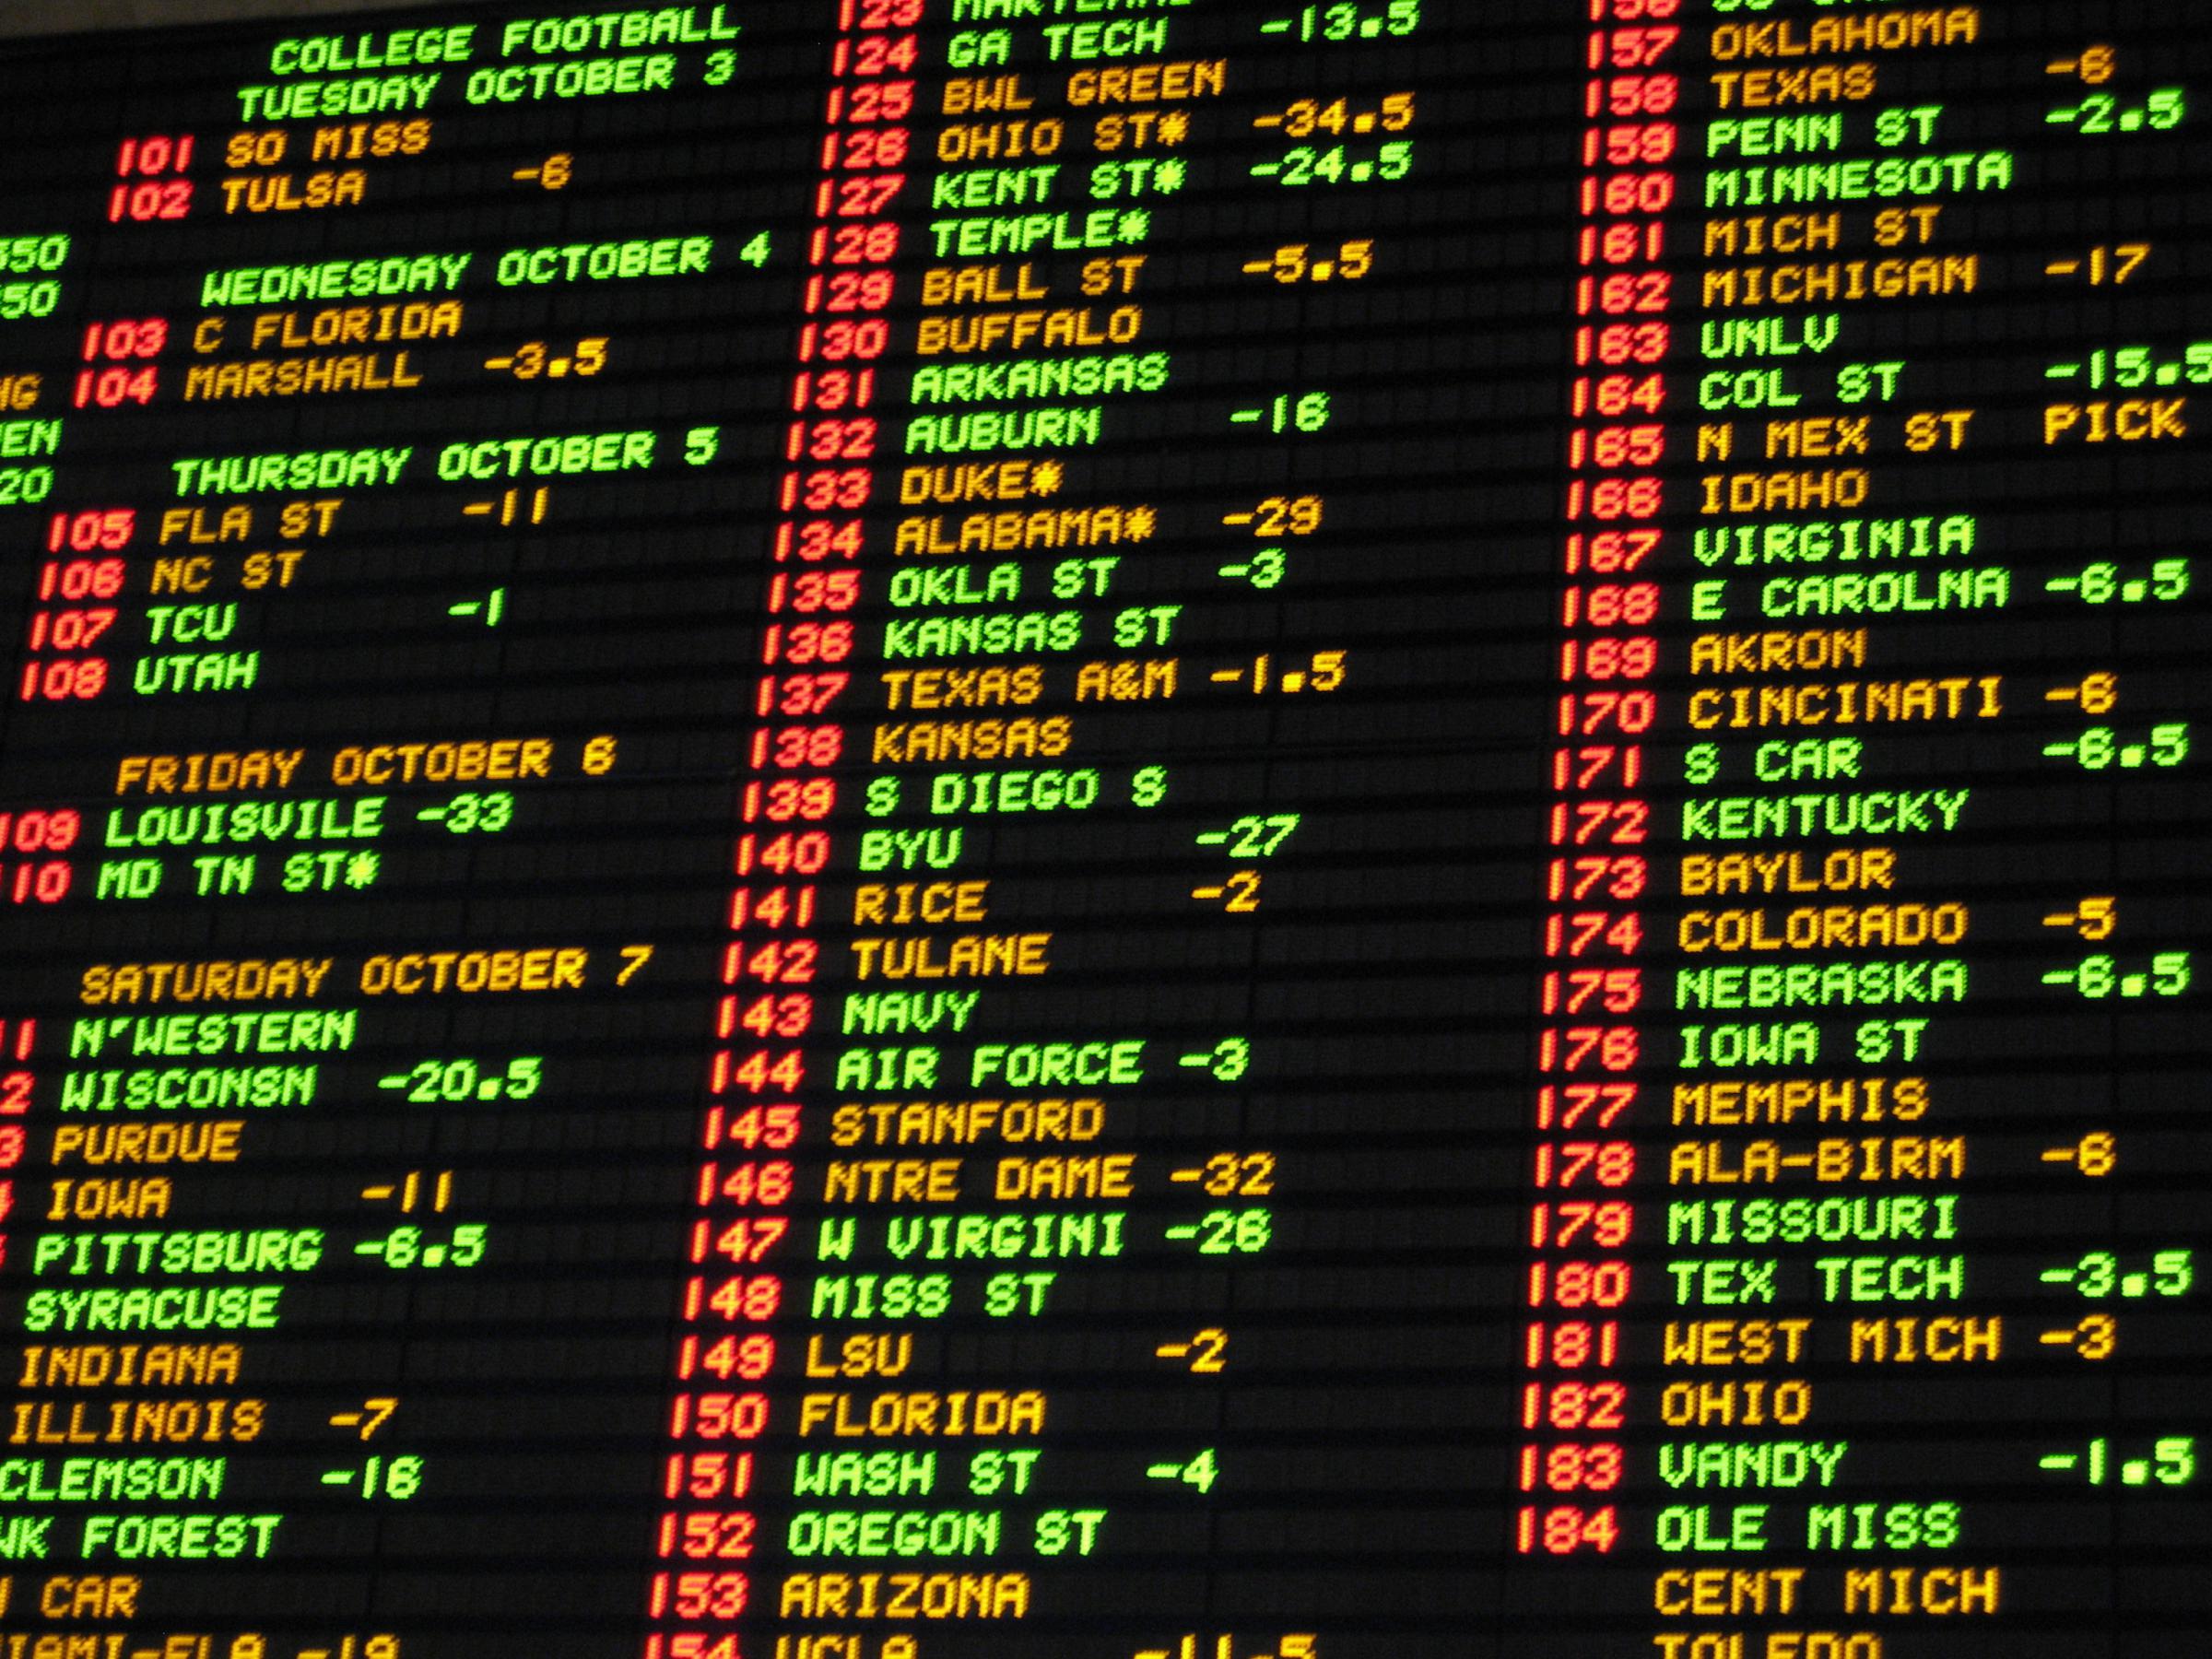 Wisconsin governor signs second sports betting agreement